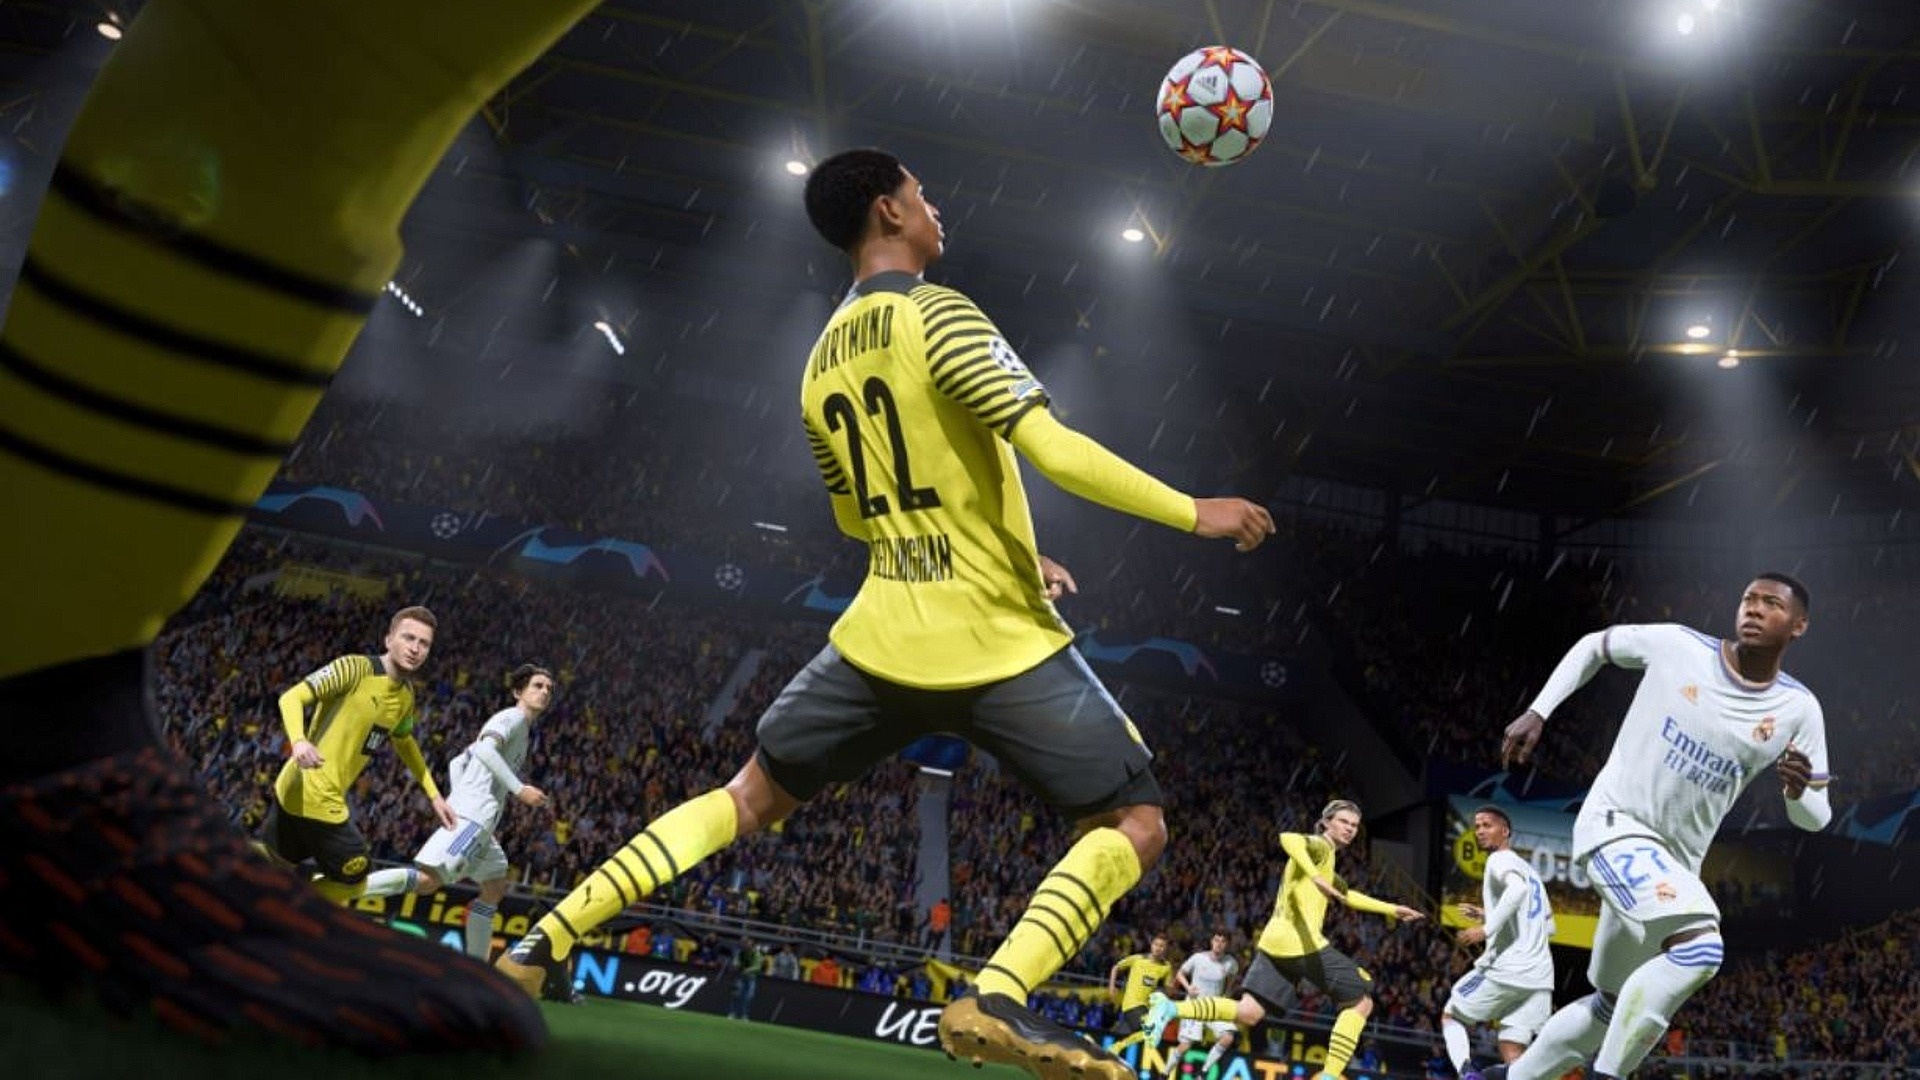 FIFA Soccer (Game): An upcoming football simulator, 2023, HyperMotion2. 1920x1080 Full HD Background.